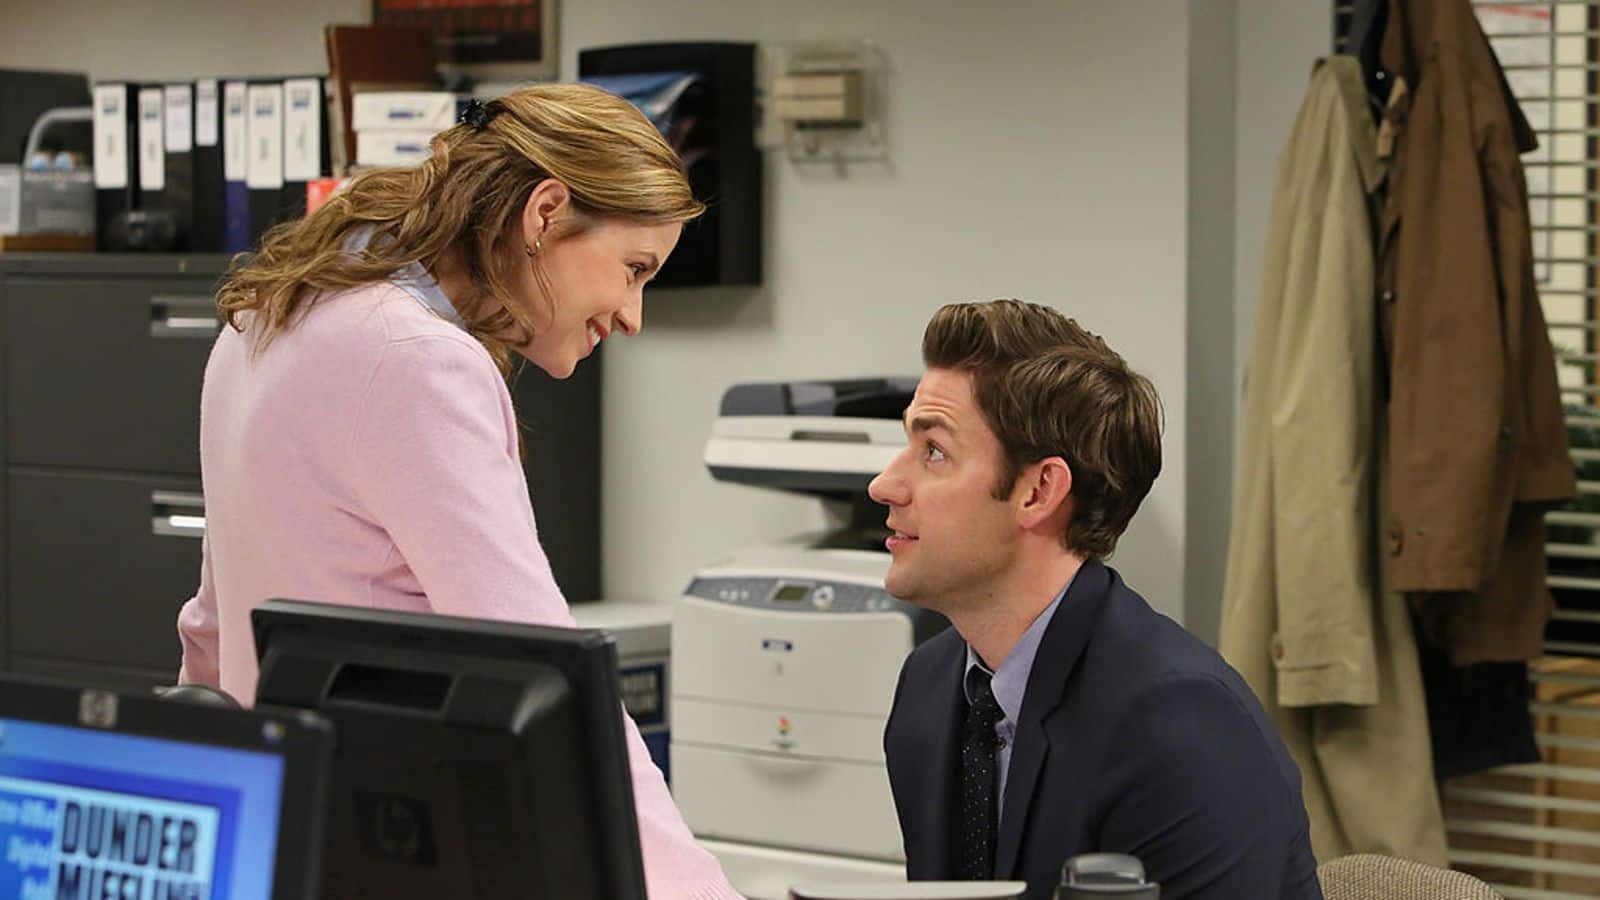 Jim gifting Pam their relationship footage was Emily Blunt's idea 